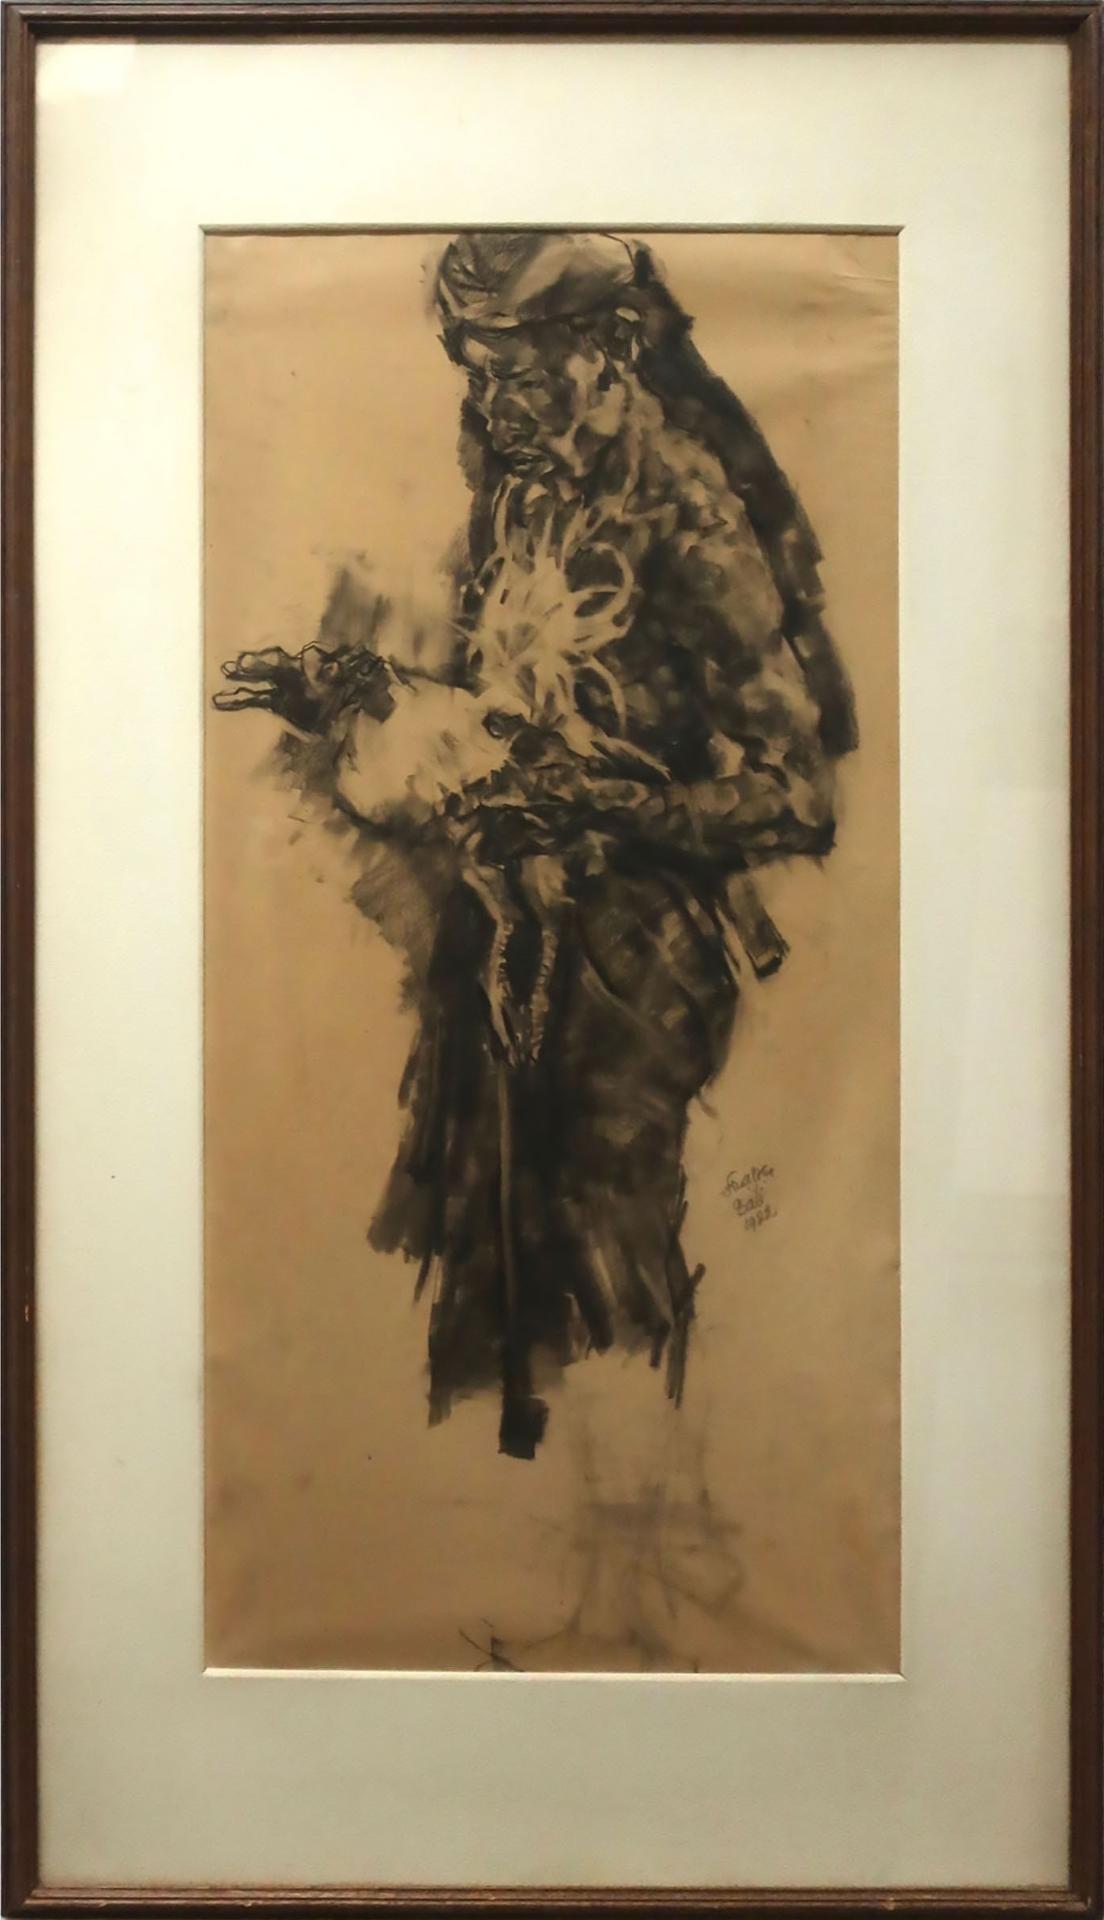 Roland Strasser (1897-1974) - Untitled (Balinese Man With Fighting Cock)